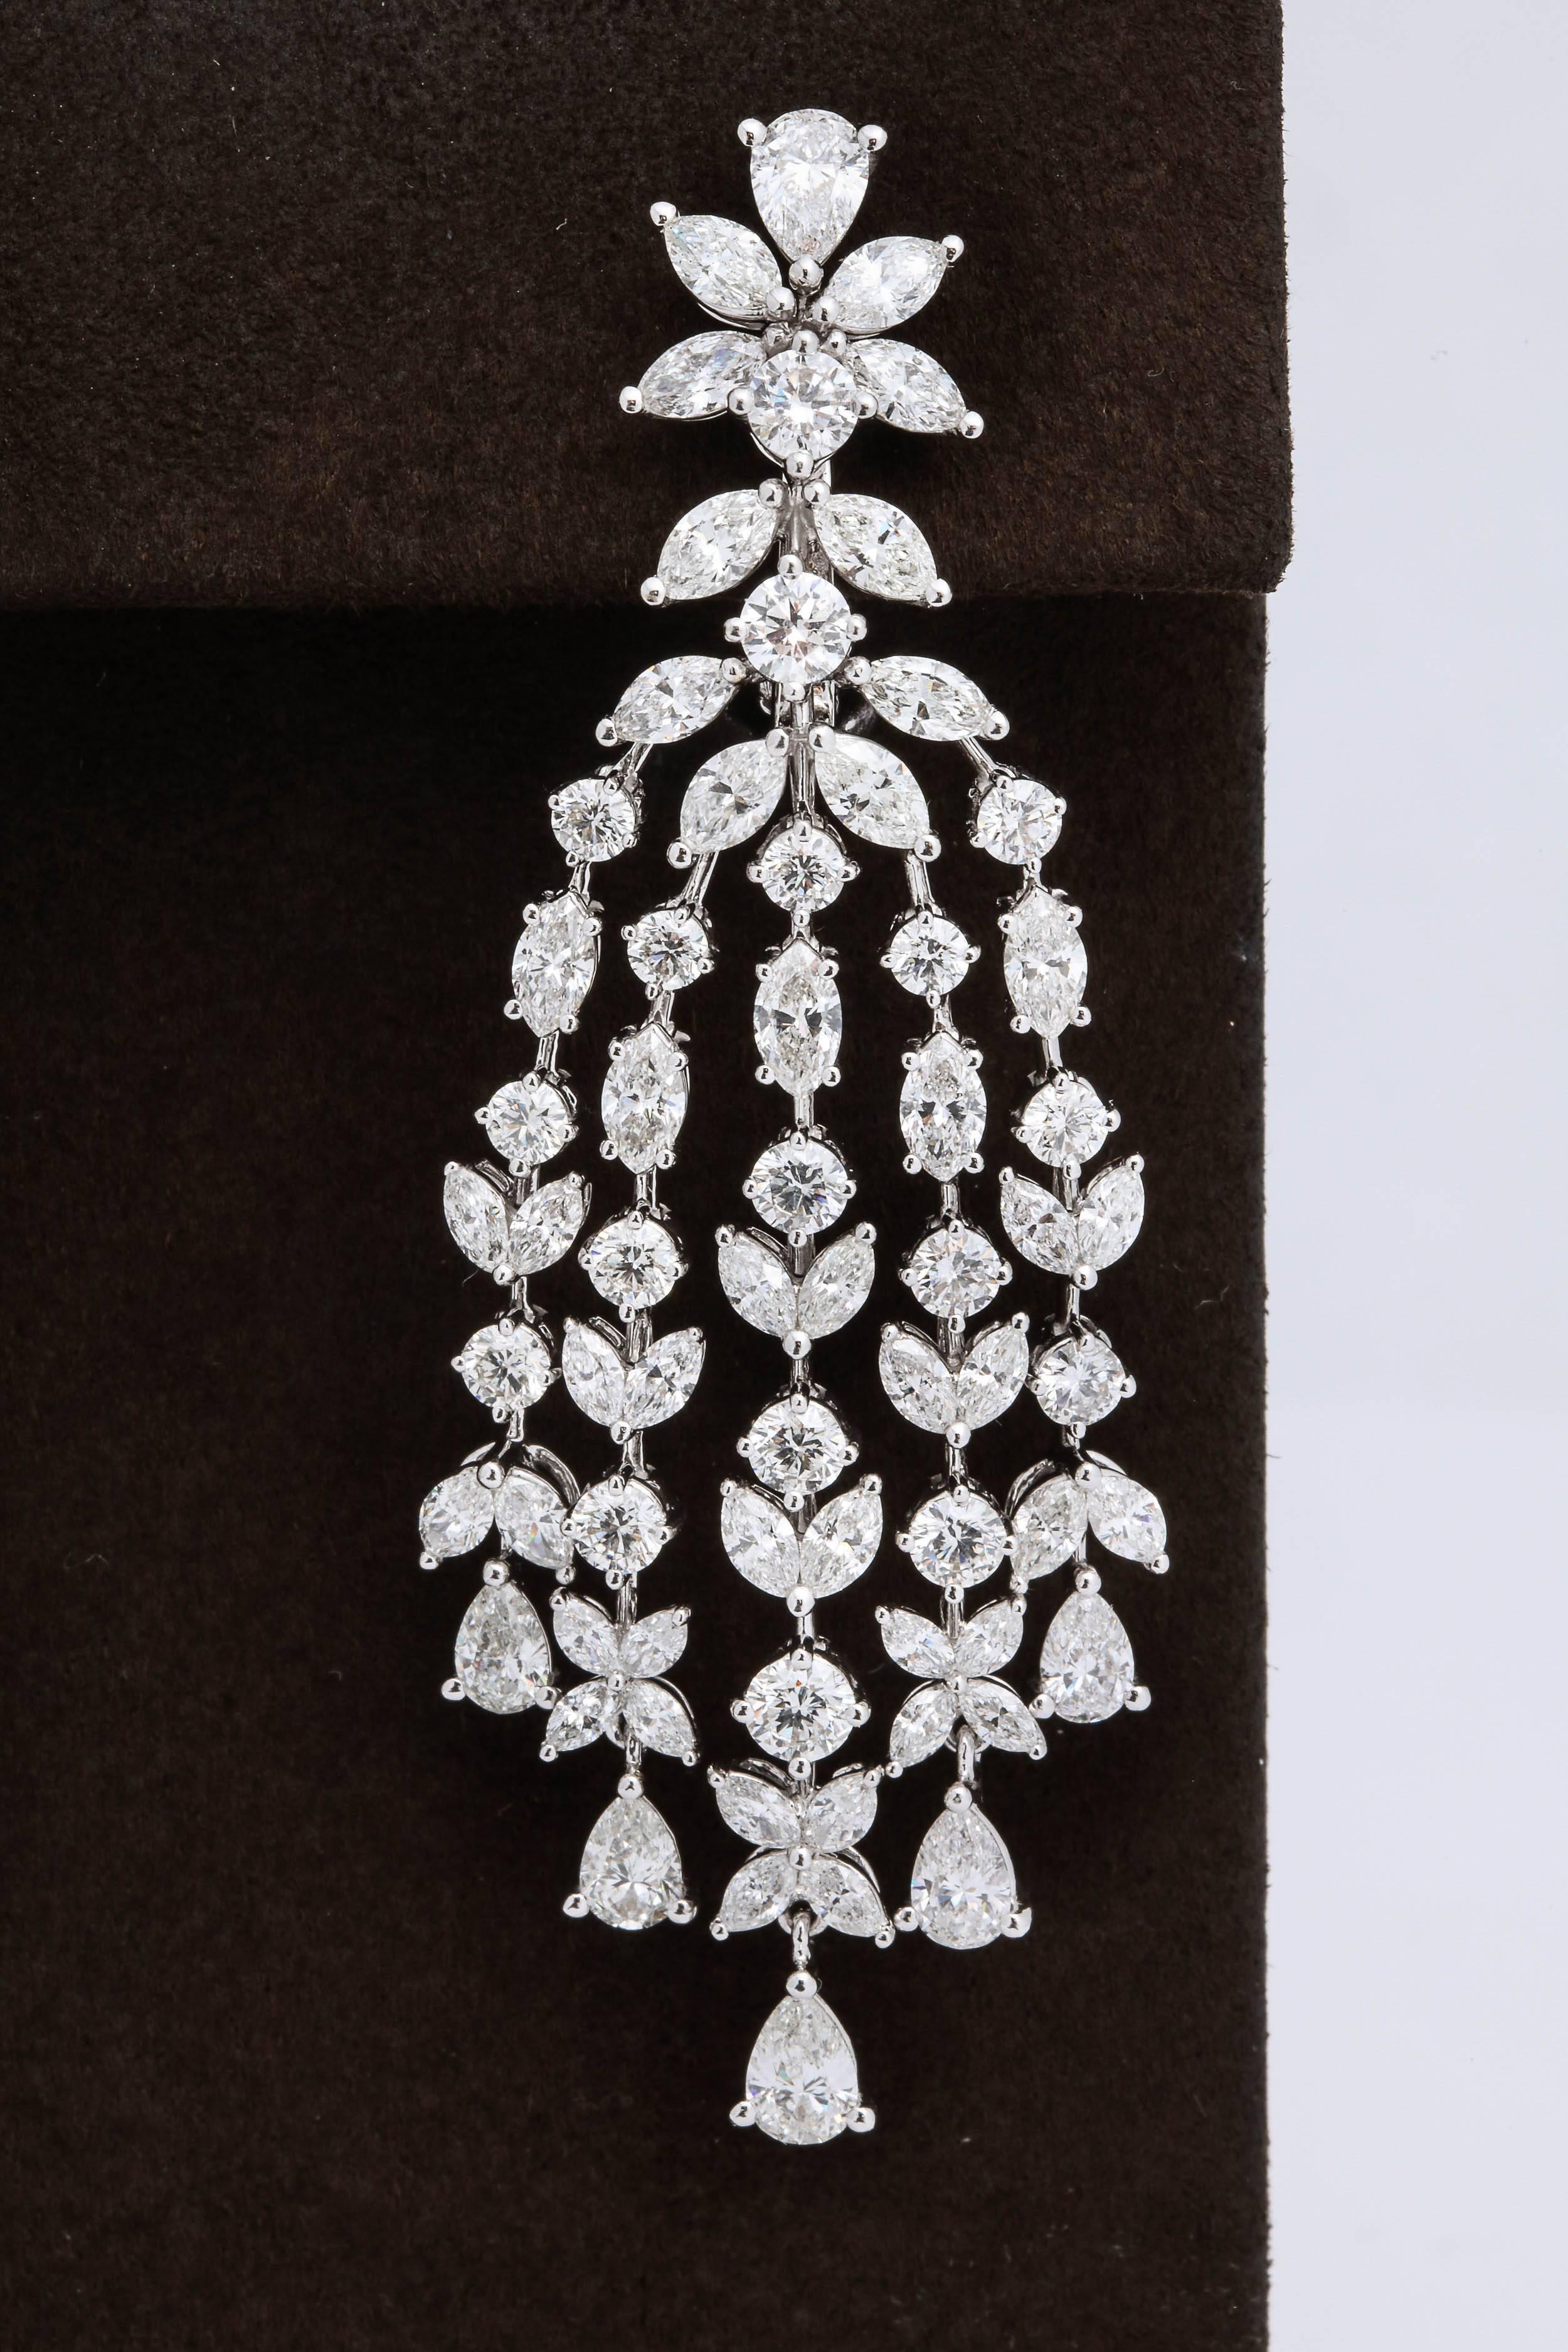 
A beautiful pair of grand earrings.

15.84 carats of white round, pear, and marquise cut diamonds set in 18k white gold. 

A grand design that mimics those found on the red carpet today -- perfect for your next black tie affair!

Approximately 2.55